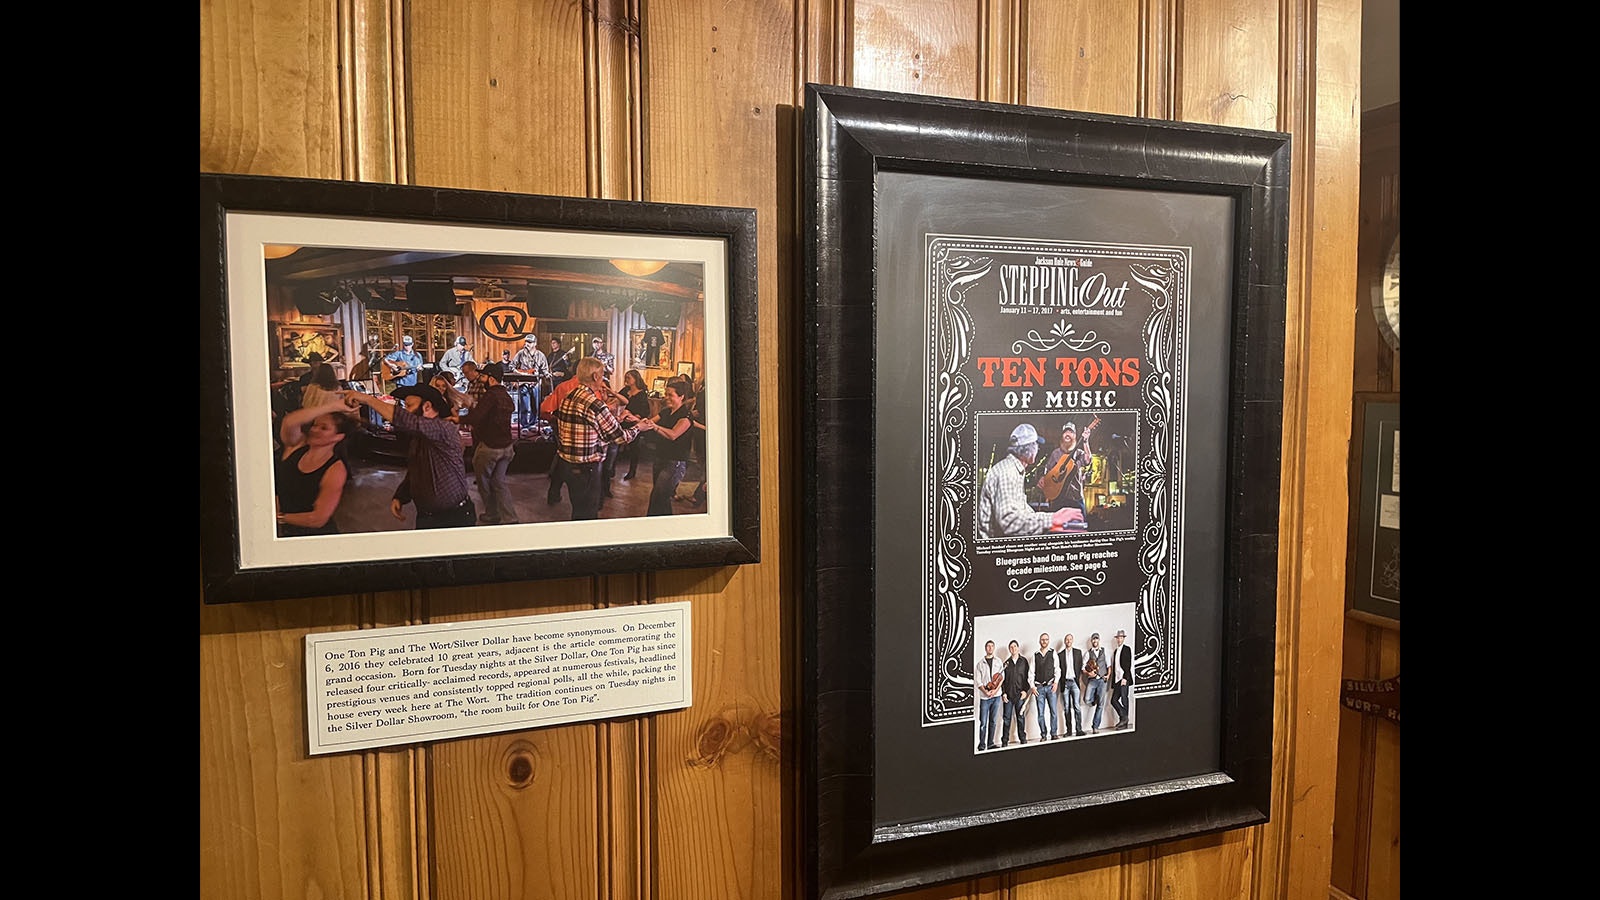 The walls at the Silver Dollar Bar in The Wort Hotel in Jackson, Wyoming, is a who's who of the past and present at the iconic watering hole.